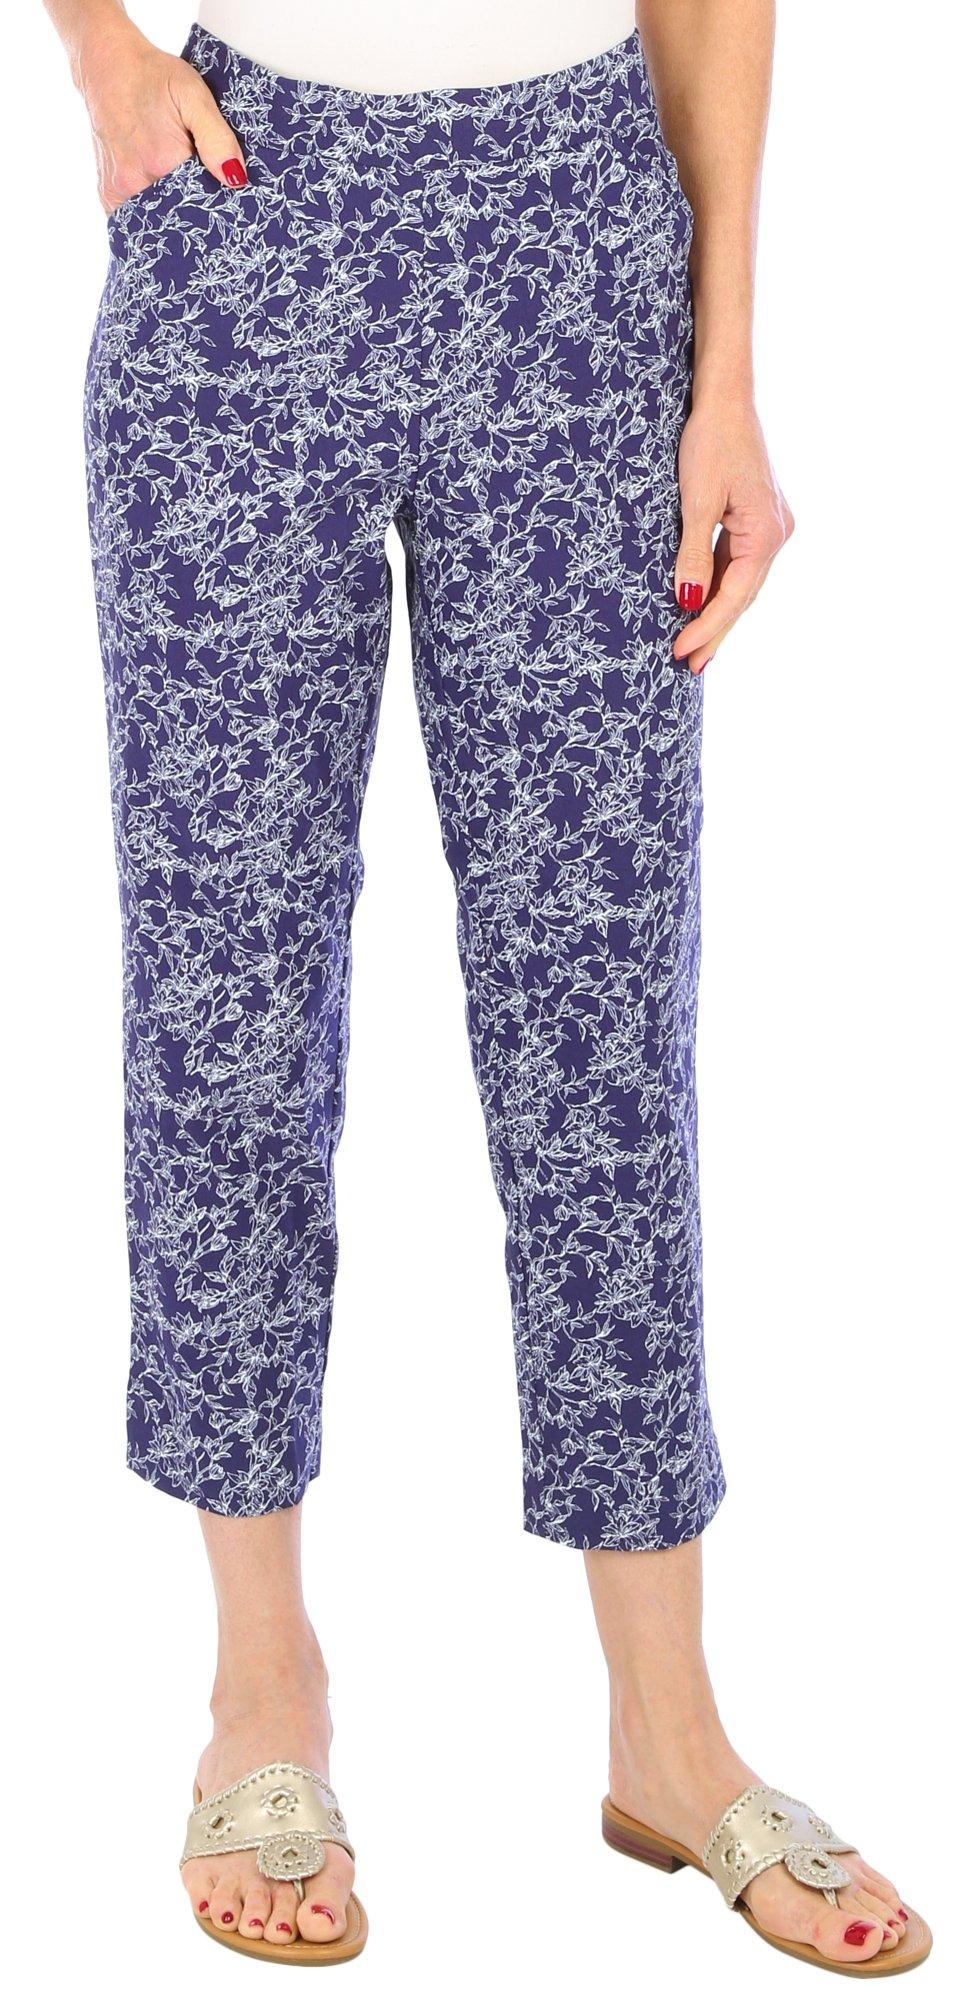 Petite Floral Print Pull-On 25 in. Ankle Pants